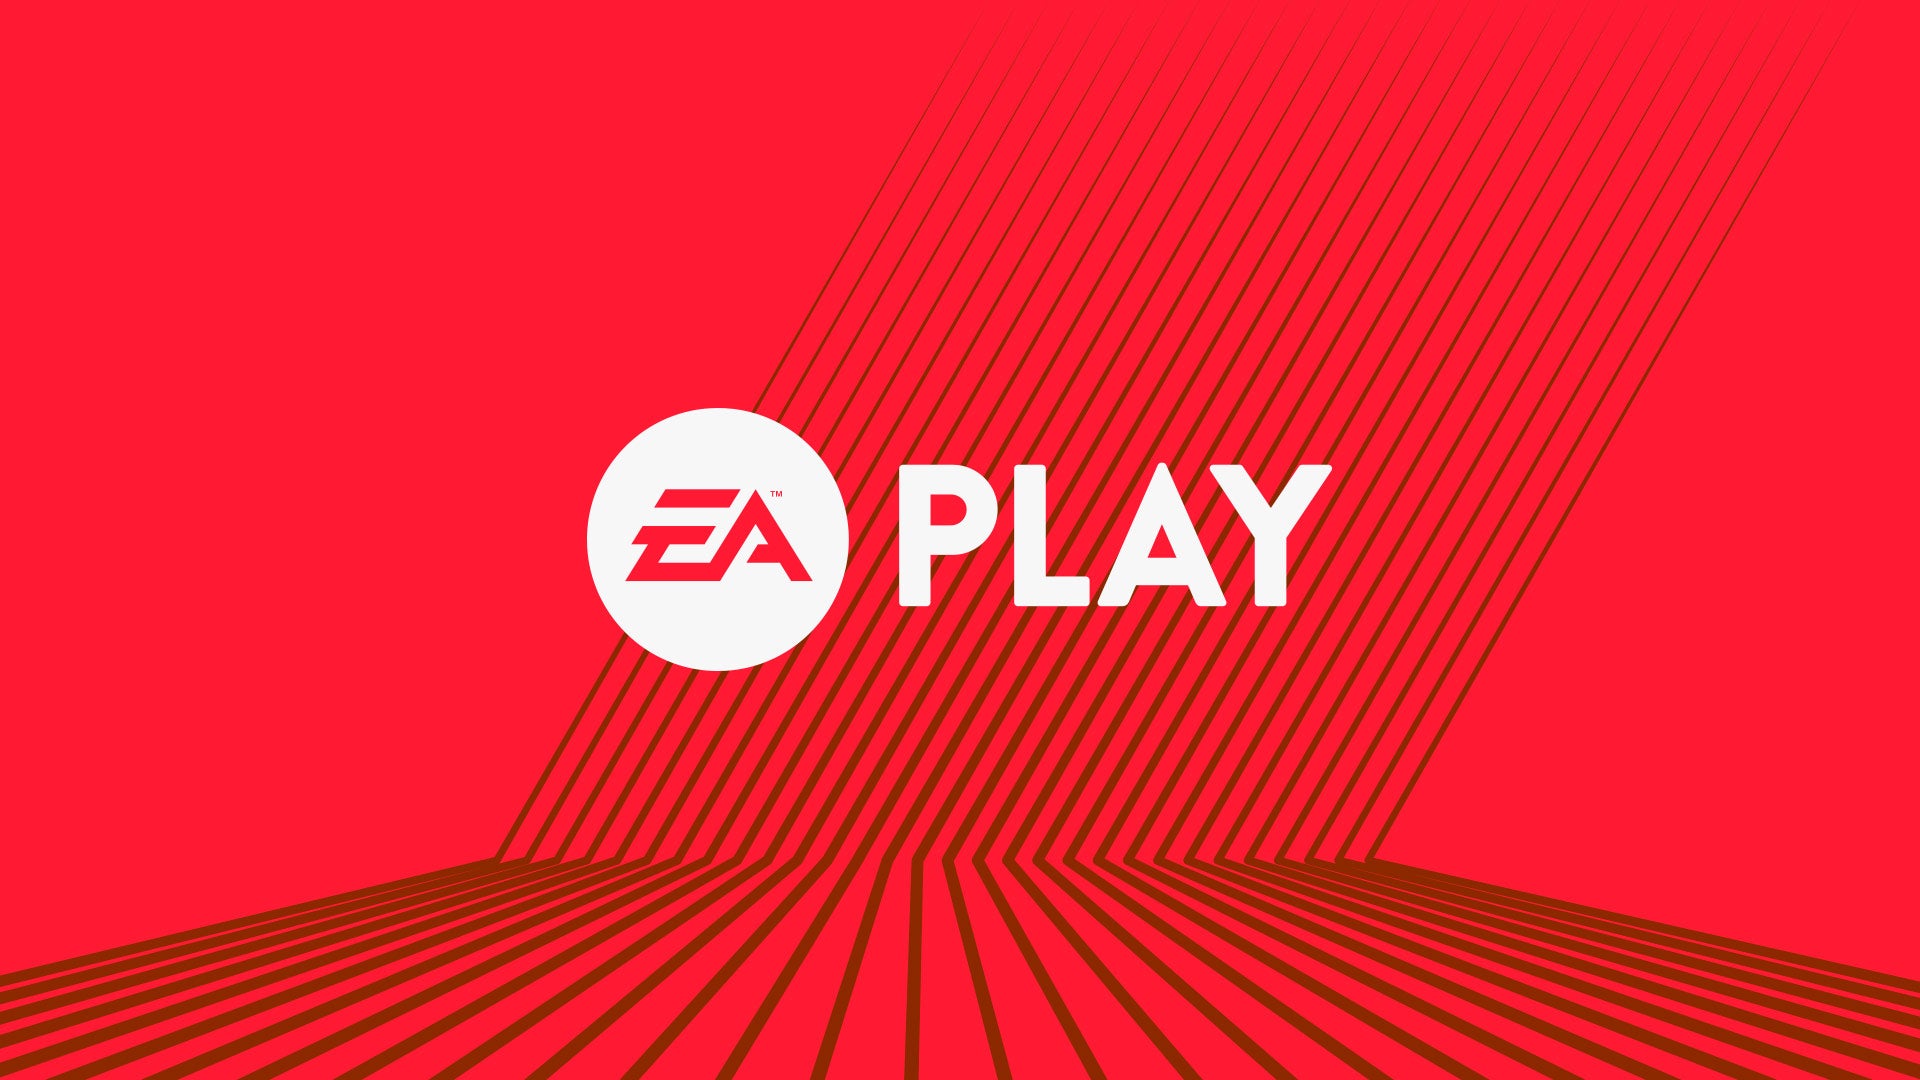 Image for EA Play E3 2019 livestreams moved to June 8